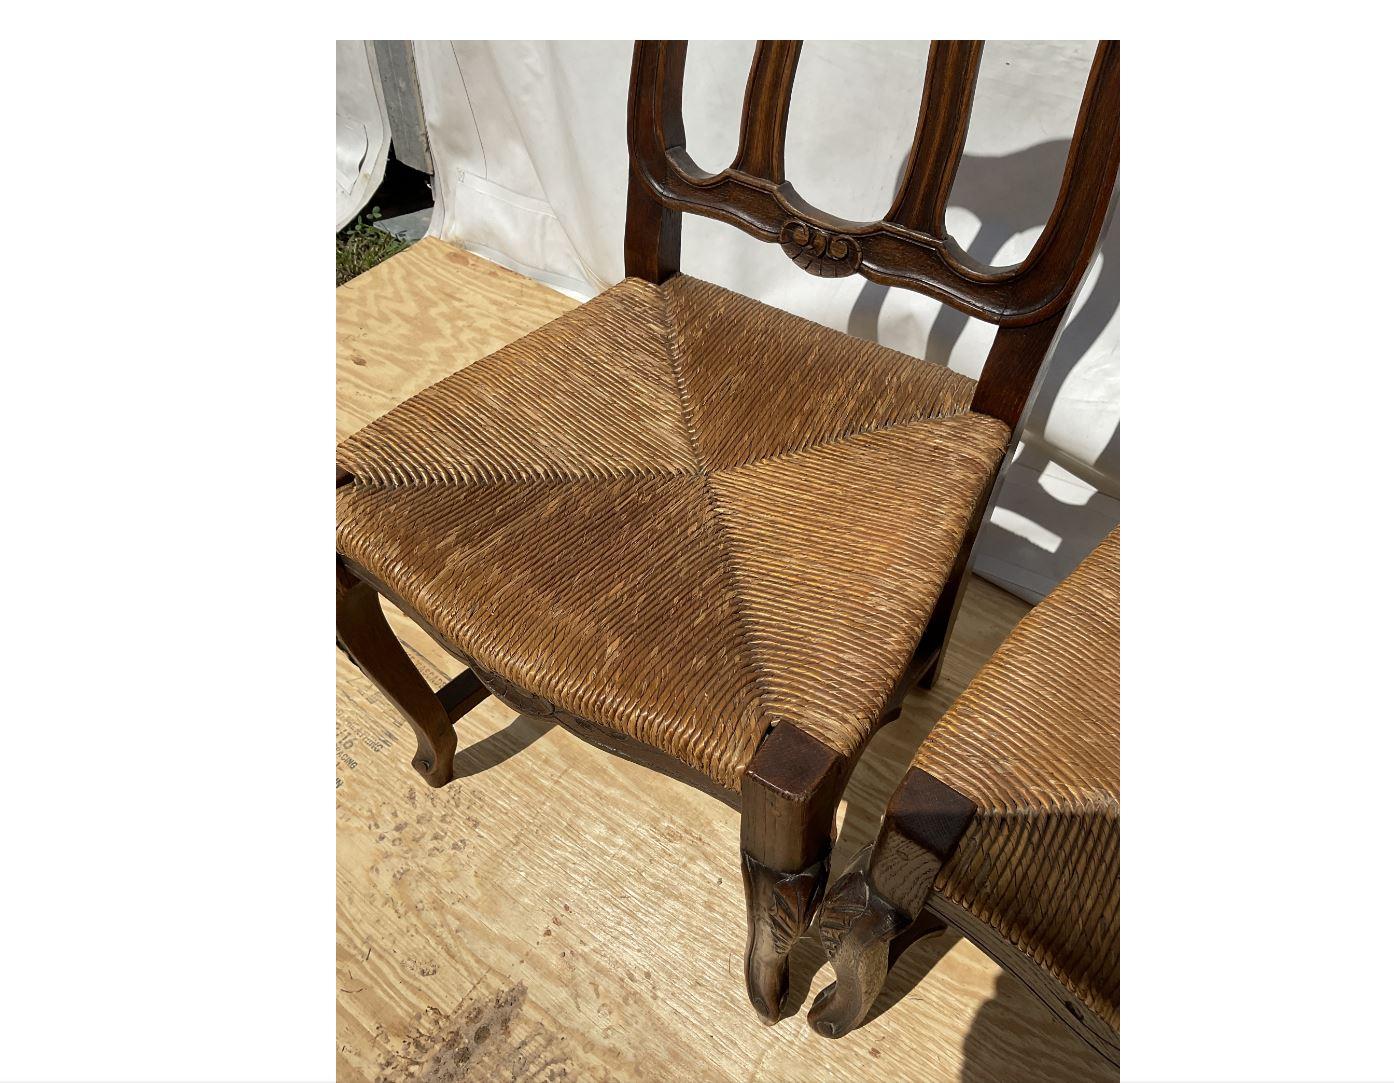 These stunning French chairs have the most beautiful and delicate engravings. The details are beautiful and would look incredible in a more traditional or French styled home. The rush seats are in great shape and really tie the piece together. 